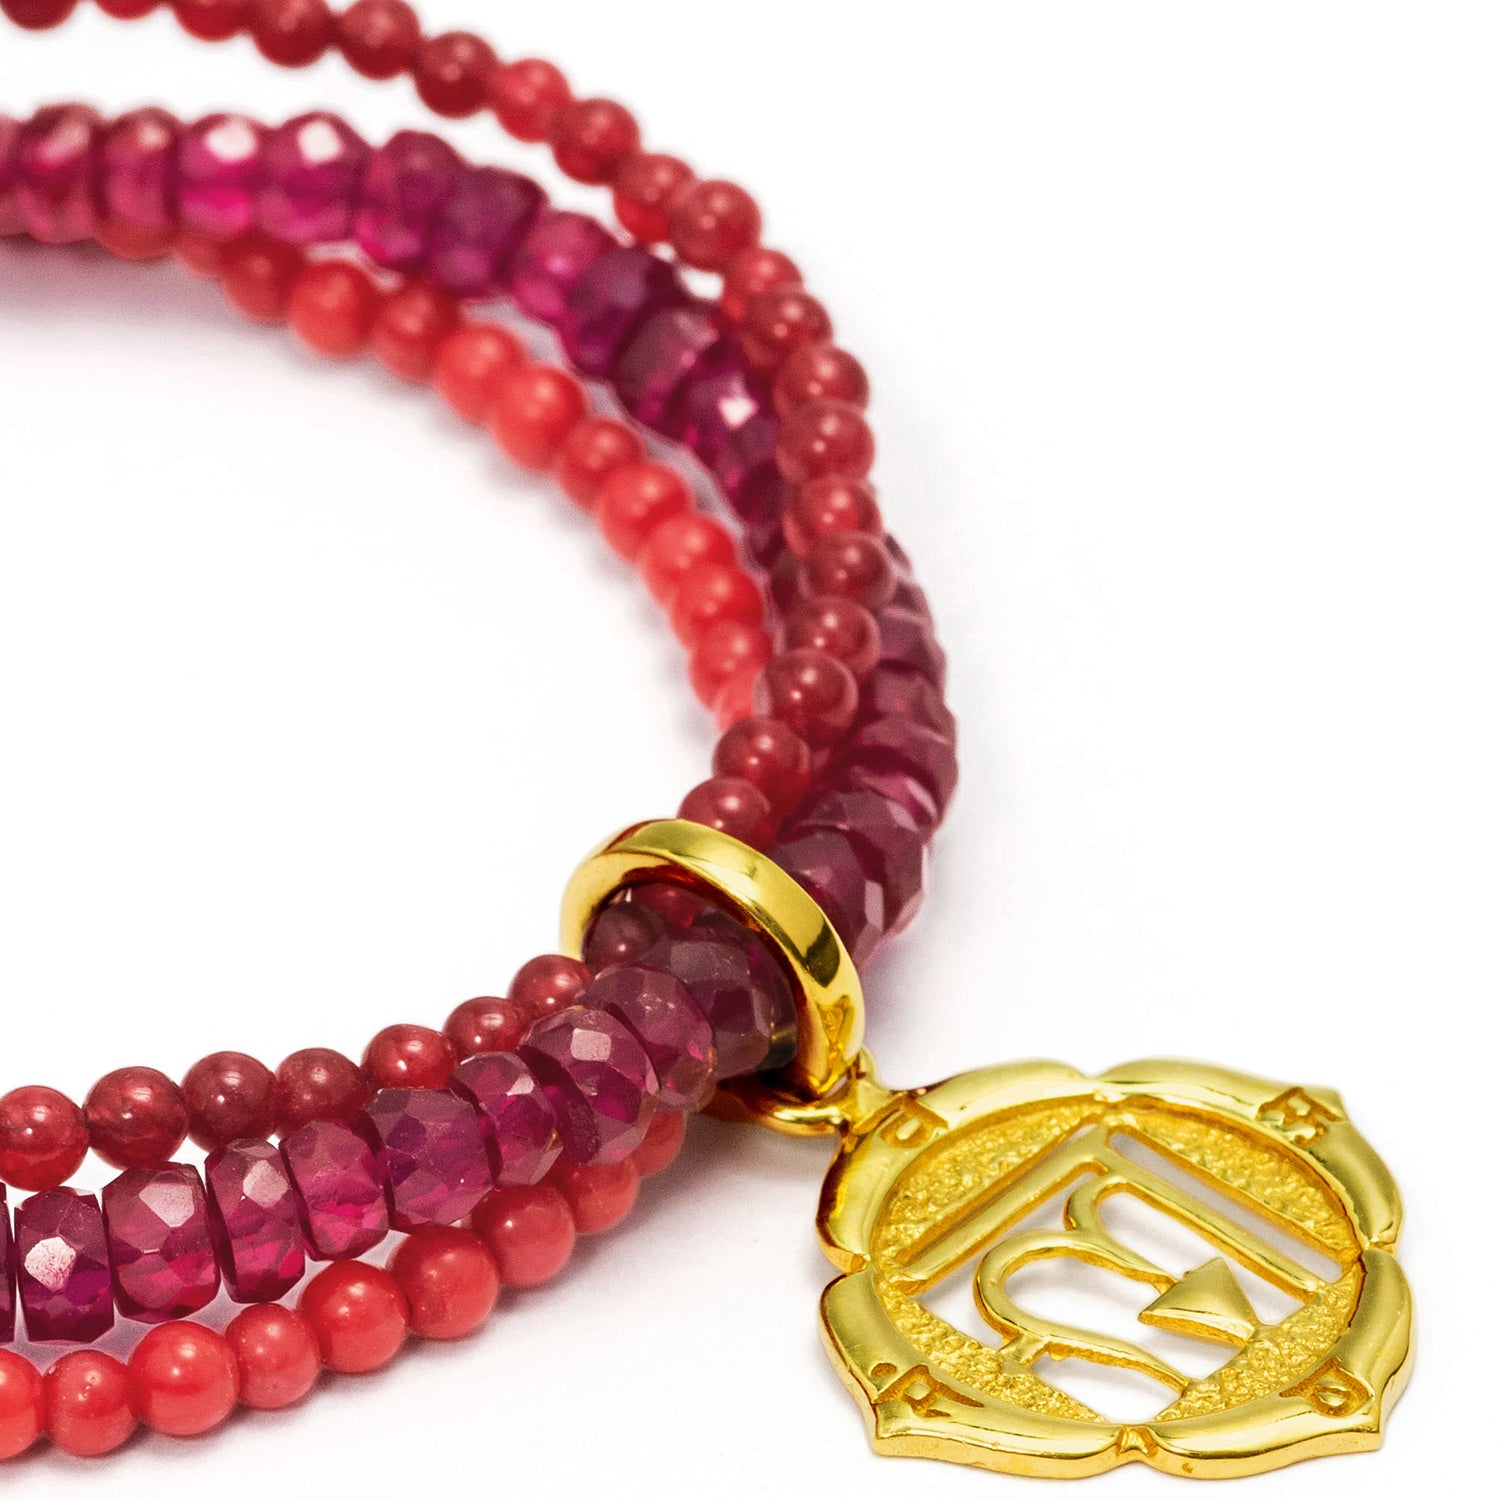 Root chakra bracelet made of three gemstone strands with high-quality gold-plated sterling silver applications from ETERNAL BLISS - Spiritual jewelry